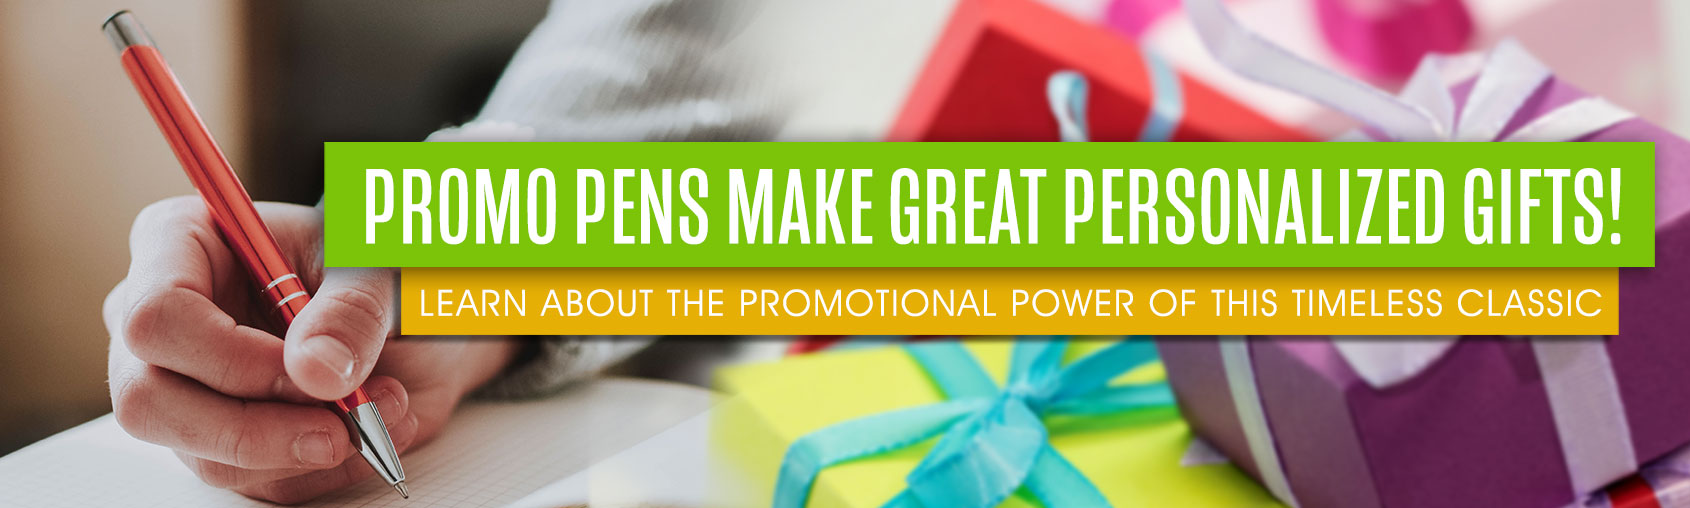 Promo Pens Make Great Personalized Gifts!